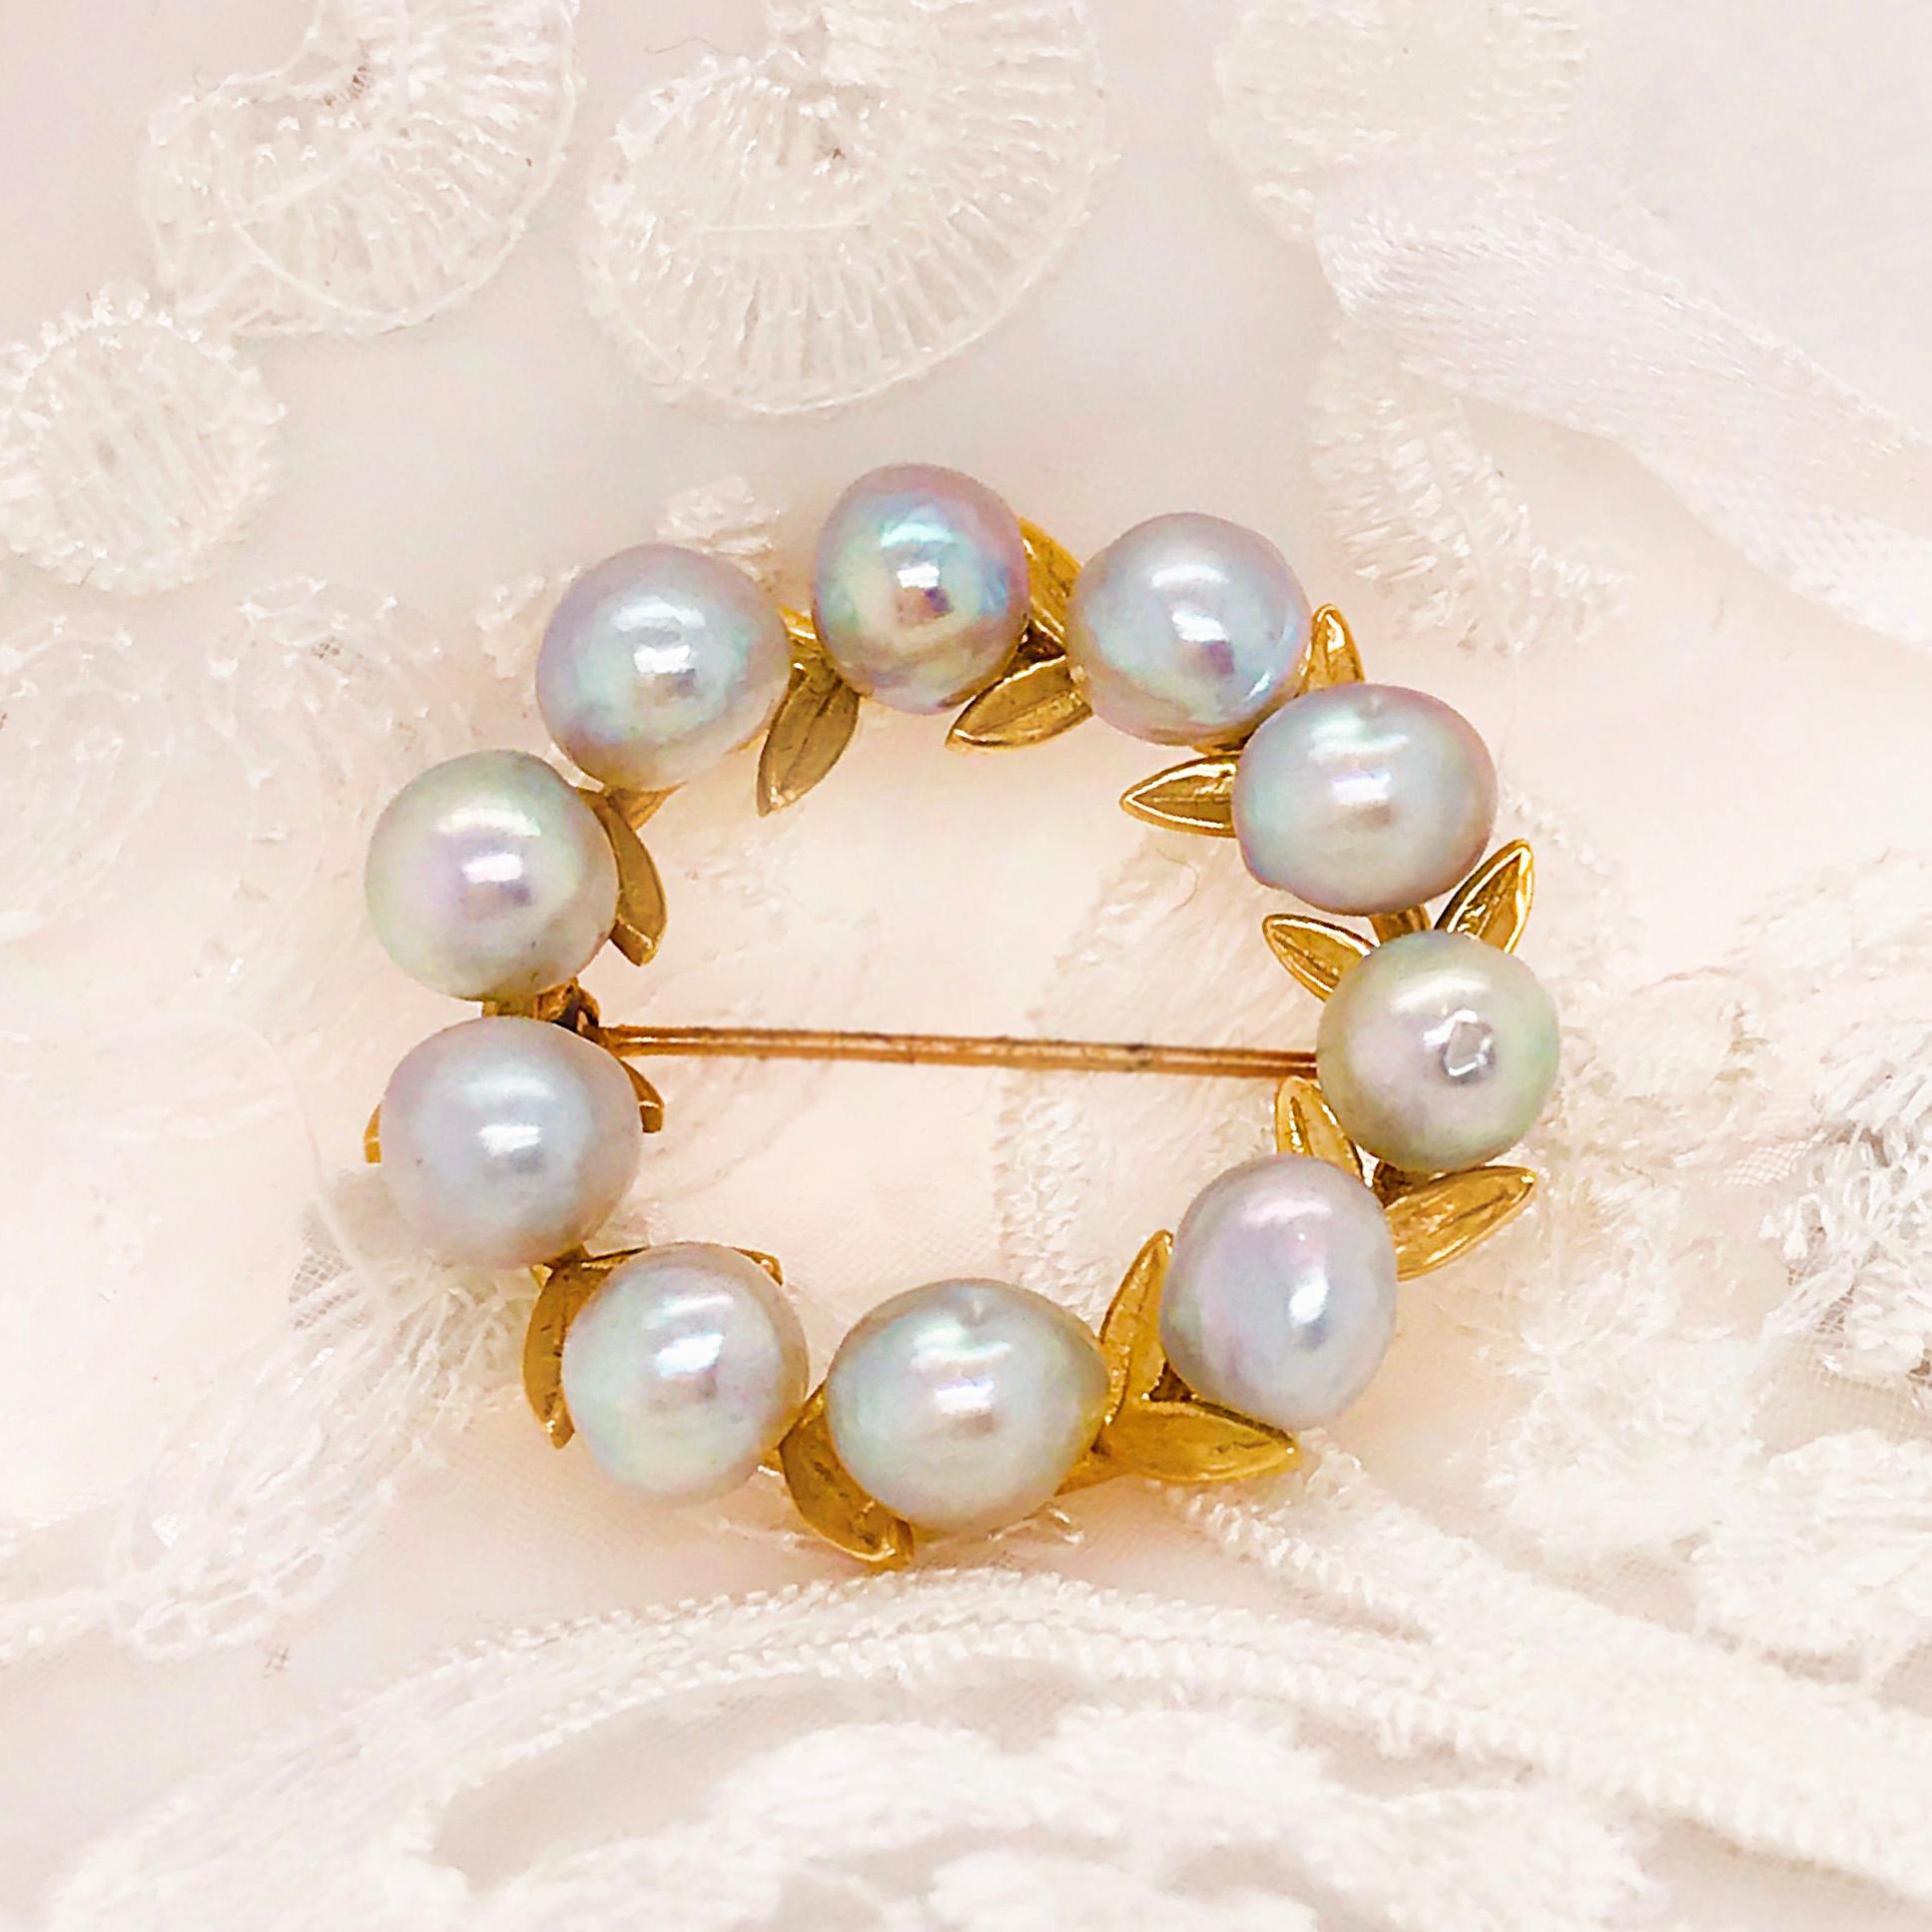 This is a beautiful blue freshwater pearl brooch that has a romantic floral design. With 10 freshwater pearls mounted on a custom golf leaf design. The pearl wreath pin/brooch is so precious and has great quality pearls with a very unique color.